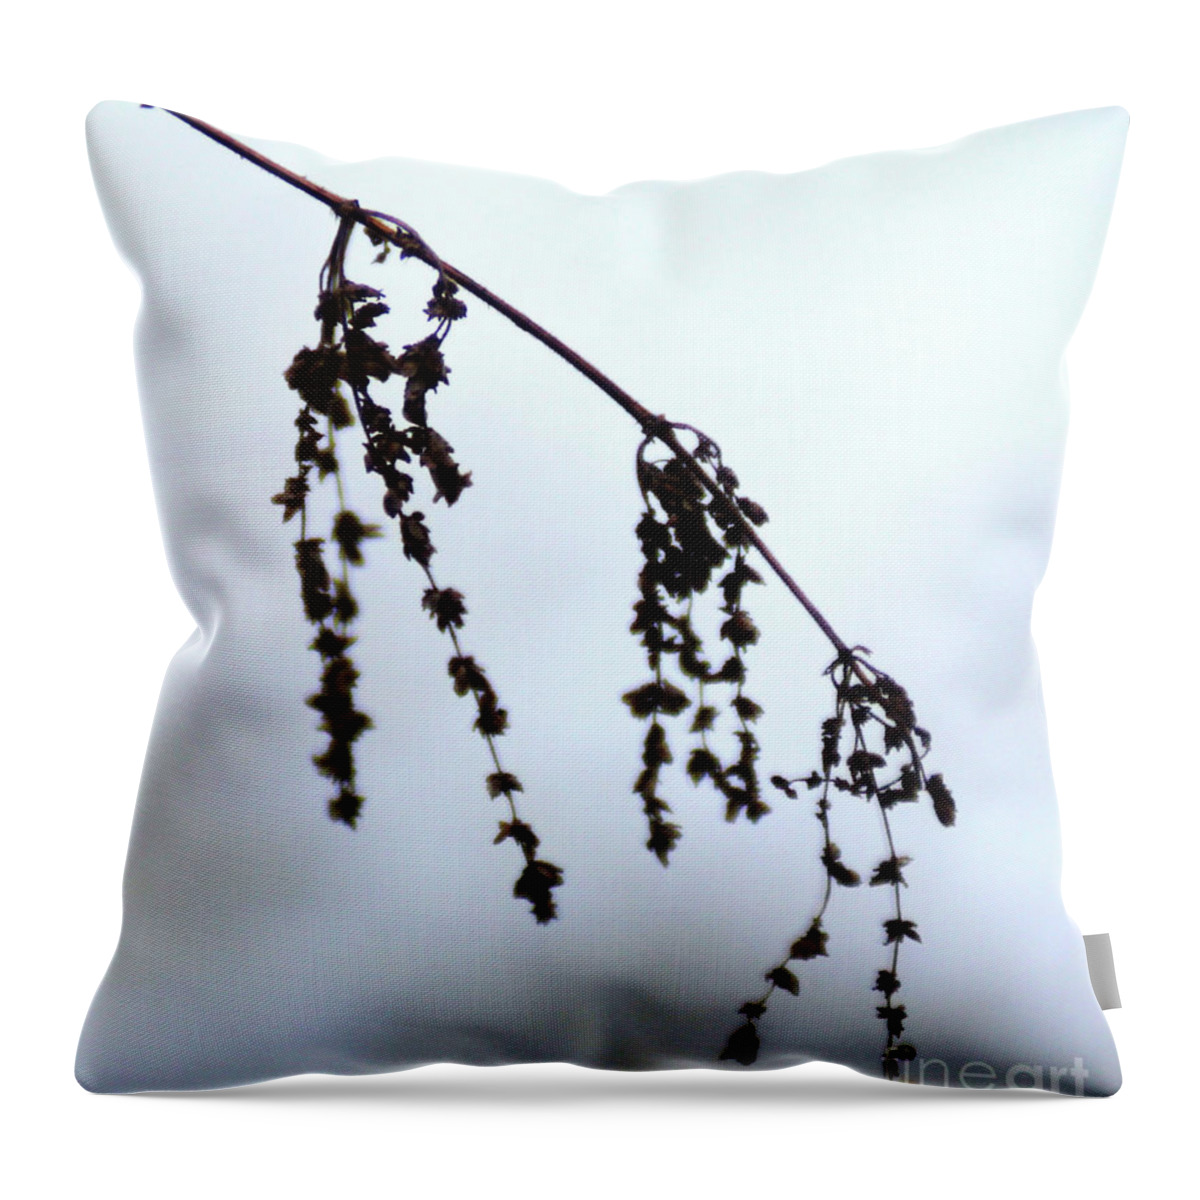 Autumn Throw Pillow featuring the photograph Autumn 1 by Wilhelm Hufnagl